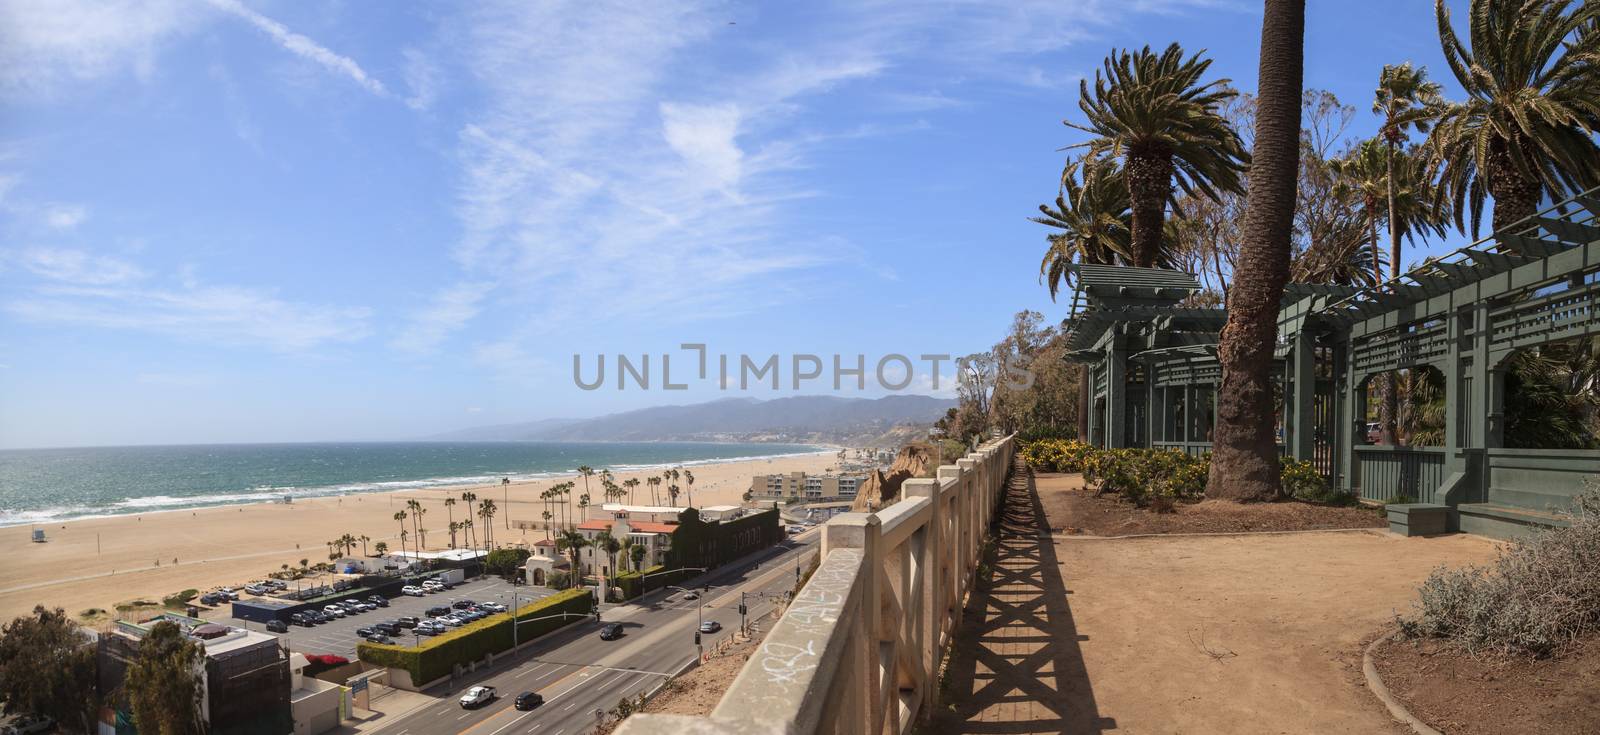 Along the Santa Monica coastline with a blue sky over the white sand of the beach in Southern California, United States.